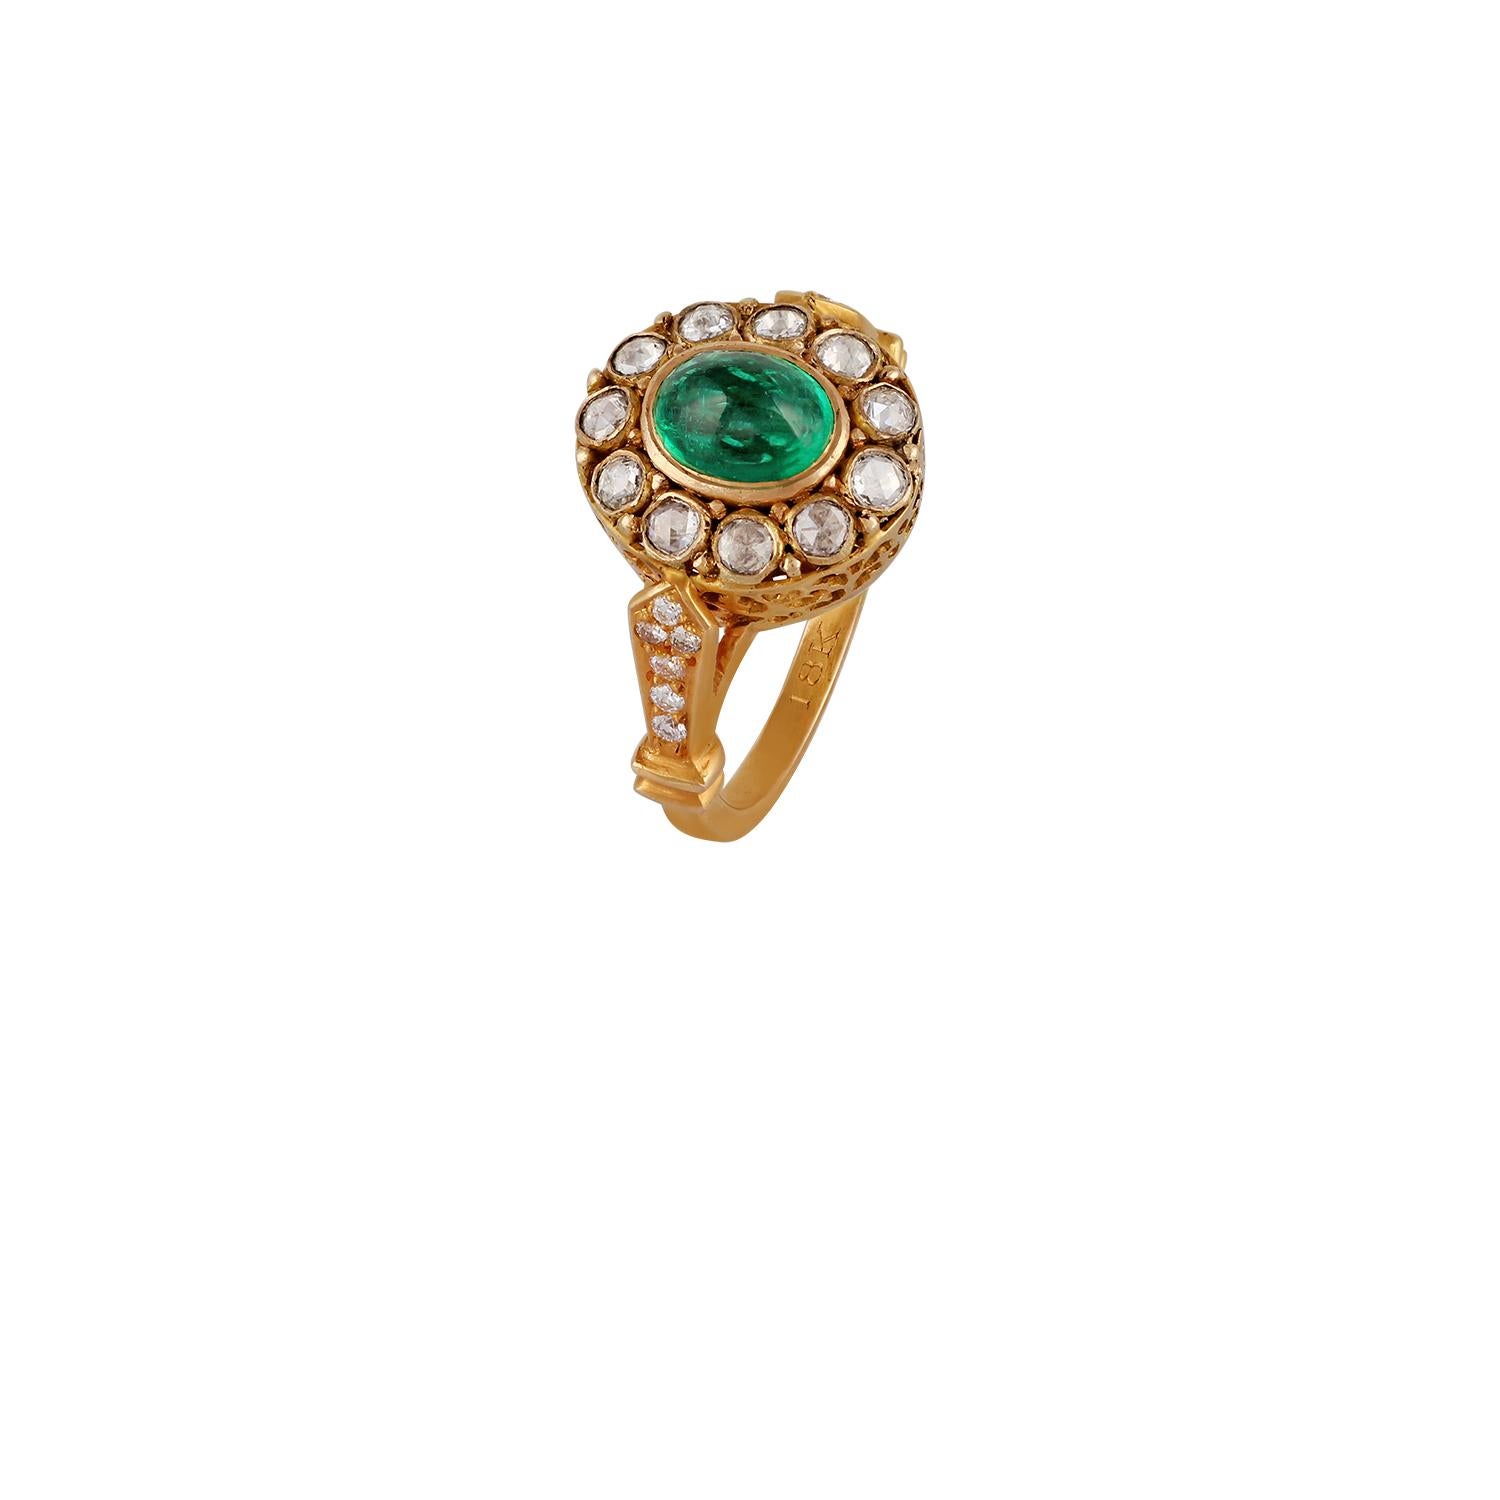 Contemporary 1.14 Carat Cabochon Emerald and Diamond Ring Studded in 18 Karat Yellow Gold For Sale